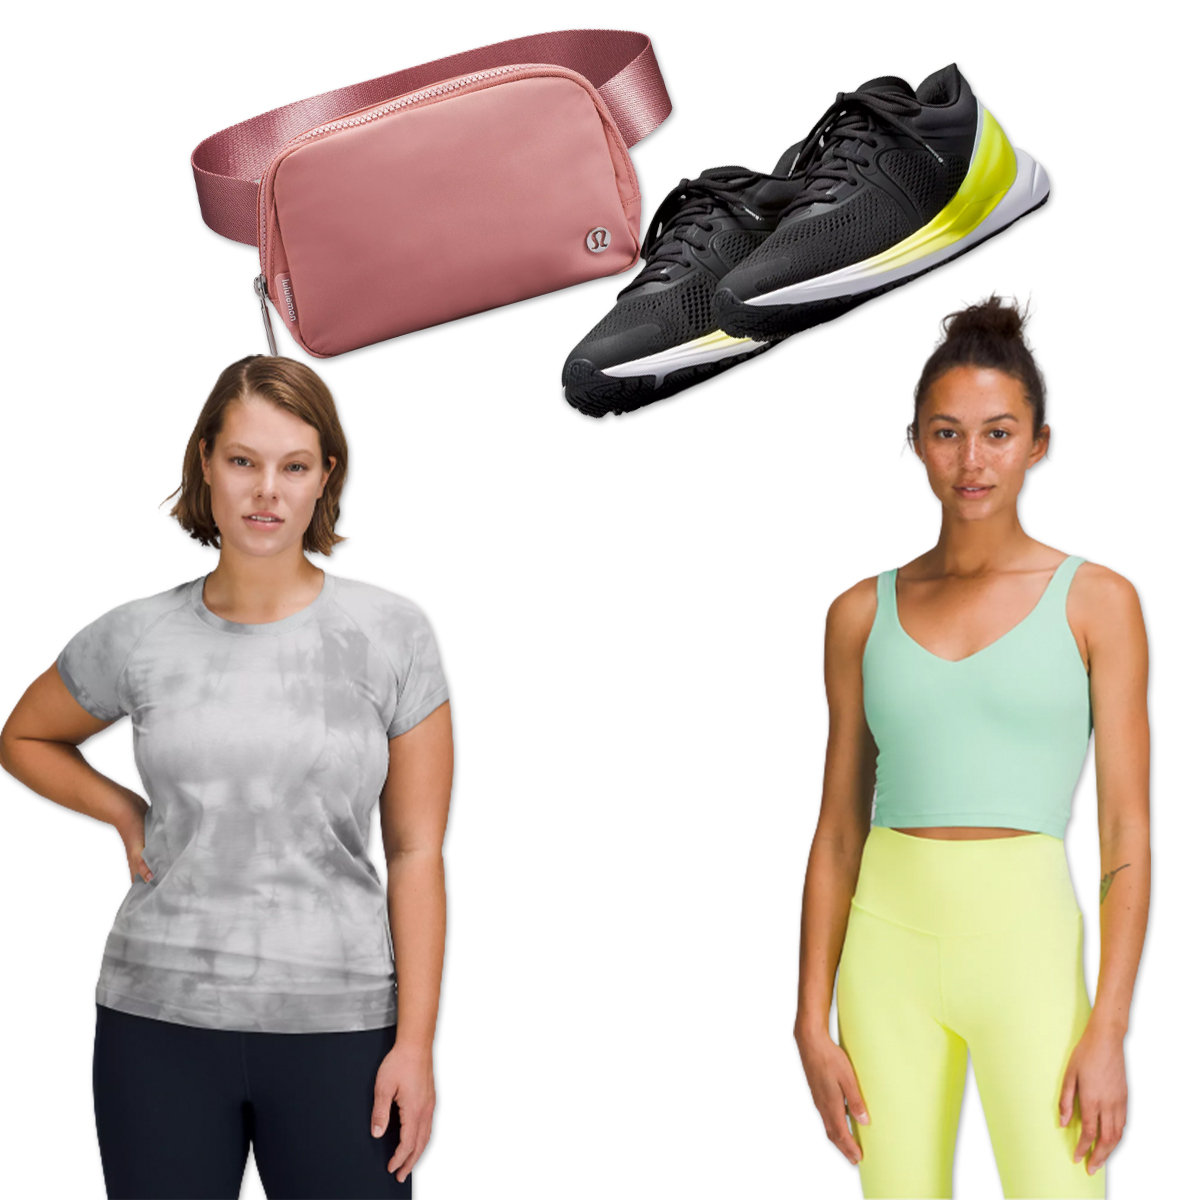 Lululemon's Mother's Day Gift Guide Has Something for Every Mom